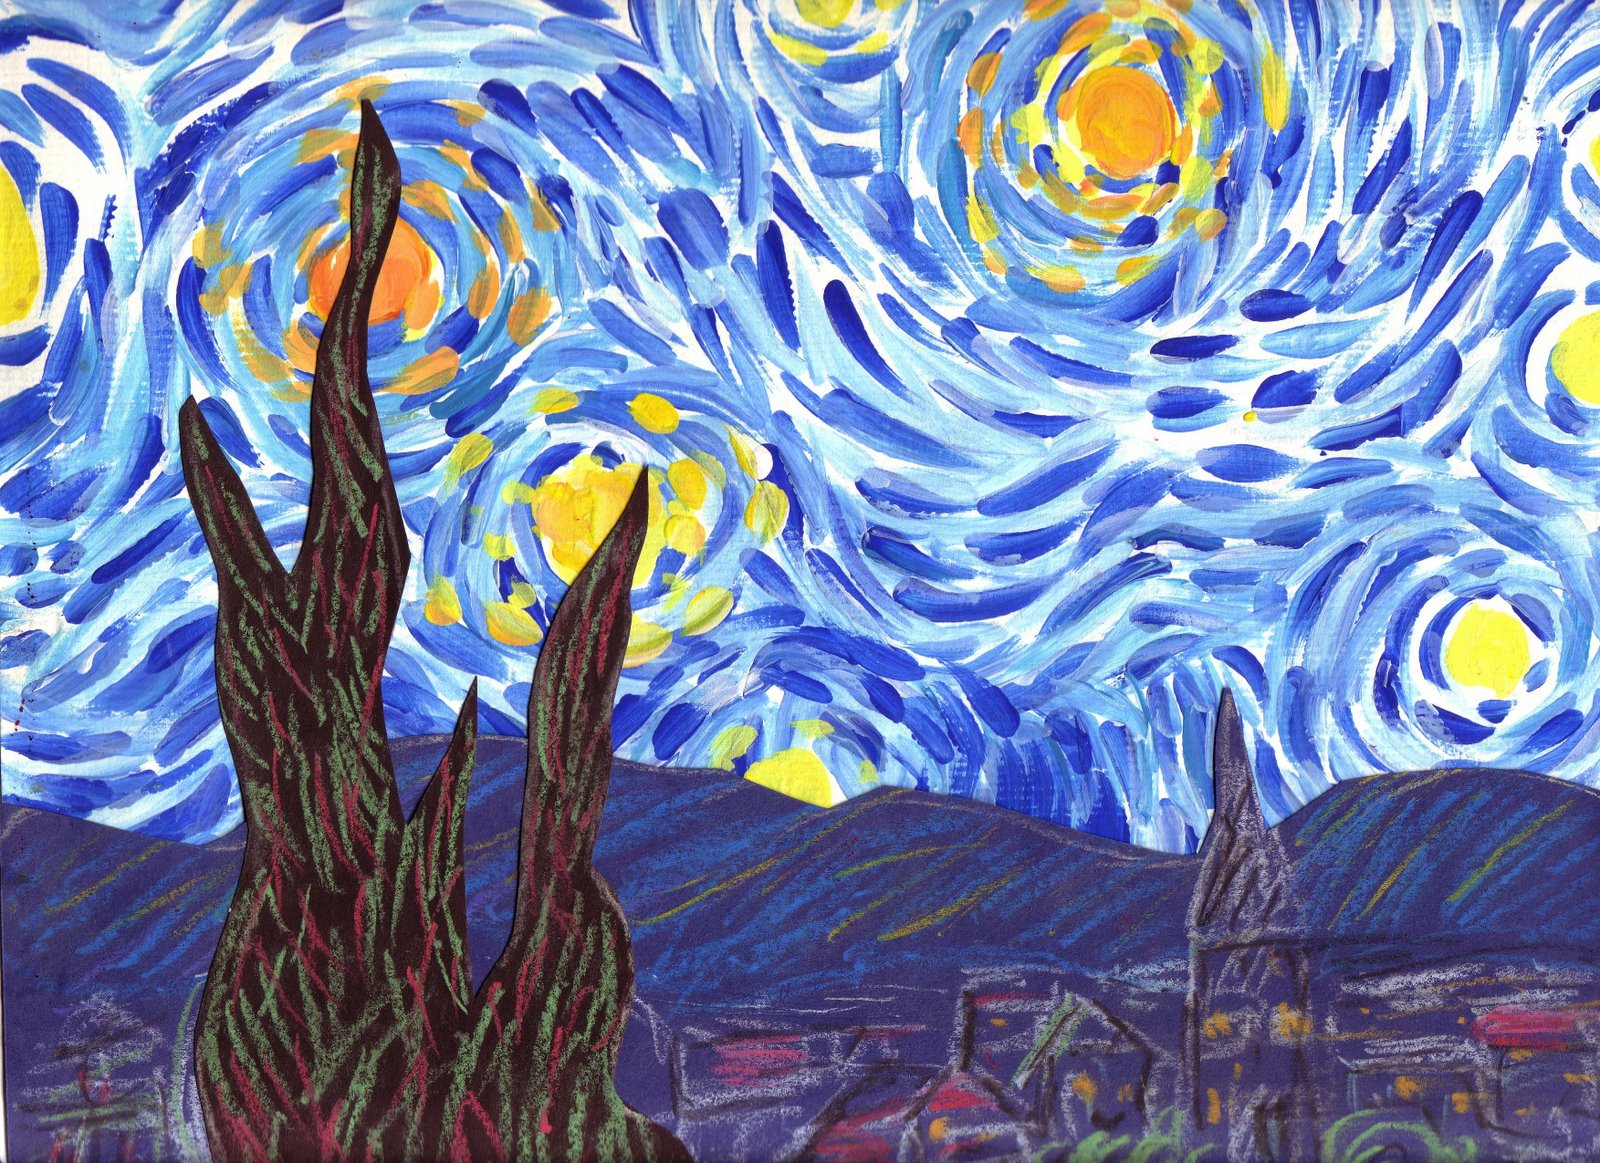 Starry Night. Life Lessons from Van Gogh